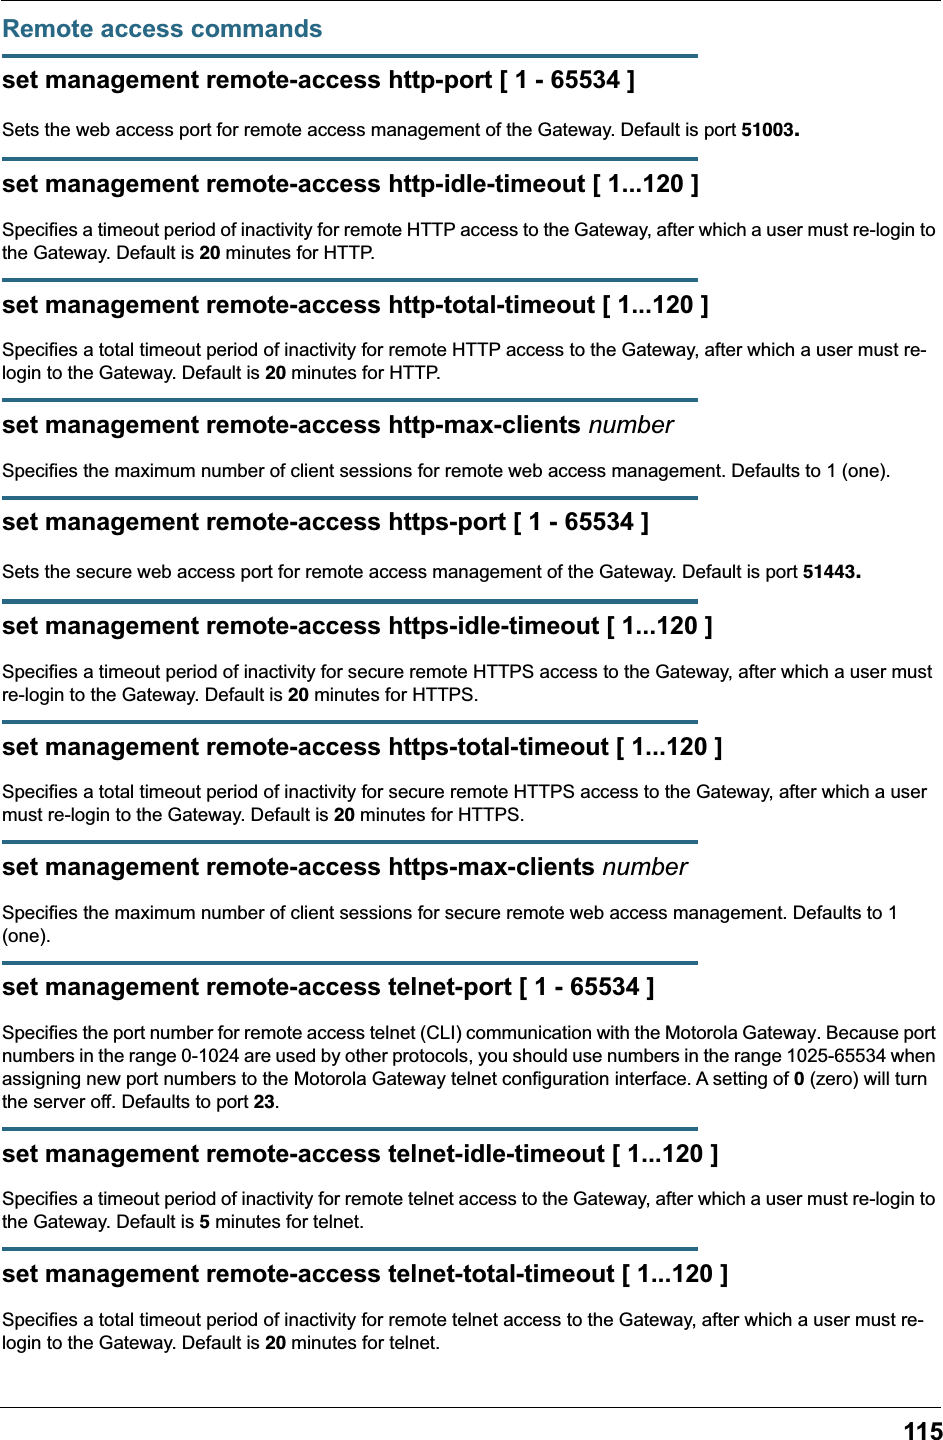 115Remote access commandsset management remote-access http-port [ 1 - 65534 ]Sets the web access port for remote access management of the Gateway. Default is port 51003.set management remote-access http-idle-timeout [ 1...120 ]Specifies a timeout period of inactivity for remote HTTP access to the Gateway, after which a user must re-login to the Gateway. Default is 20 minutes for HTTP.set management remote-access http-total-timeout [ 1...120 ]Specifies a total timeout period of inactivity for remote HTTP access to the Gateway, after which a user must re-login to the Gateway. Default is 20 minutes for HTTP.set management remote-access http-max-clients numberSpecifies the maximum number of client sessions for remote web access management. Defaults to 1 (one).set management remote-access https-port [ 1 - 65534 ]Sets the secure web access port for remote access management of the Gateway. Default is port 51443.set management remote-access https-idle-timeout [ 1...120 ]Specifies a timeout period of inactivity for secure remote HTTPS access to the Gateway, after which a user must re-login to the Gateway. Default is 20 minutes for HTTPS.set management remote-access https-total-timeout [ 1...120 ]Specifies a total timeout period of inactivity for secure remote HTTPS access to the Gateway, after which a user must re-login to the Gateway. Default is 20 minutes for HTTPS.set management remote-access https-max-clients numberSpecifies the maximum number of client sessions for secure remote web access management. Defaults to 1 (one).set management remote-access telnet-port [ 1 - 65534 ]Specifies the port number for remote access telnet (CLI) communication with the Motorola Gateway. Because port numbers in the range 0-1024 are used by other protocols, you should use numbers in the range 1025-65534 when assigning new port numbers to the Motorola Gateway telnet configuration interface. A setting of 0 (zero) will turn the server off. Defaults to port 23.set management remote-access telnet-idle-timeout [ 1...120 ]Specifies a timeout period of inactivity for remote telnet access to the Gateway, after which a user must re-login to the Gateway. Default is 5 minutes for telnet.set management remote-access telnet-total-timeout [ 1...120 ]Specifies a total timeout period of inactivity for remote telnet access to the Gateway, after which a user must re-login to the Gateway. Default is 20 minutes for telnet.